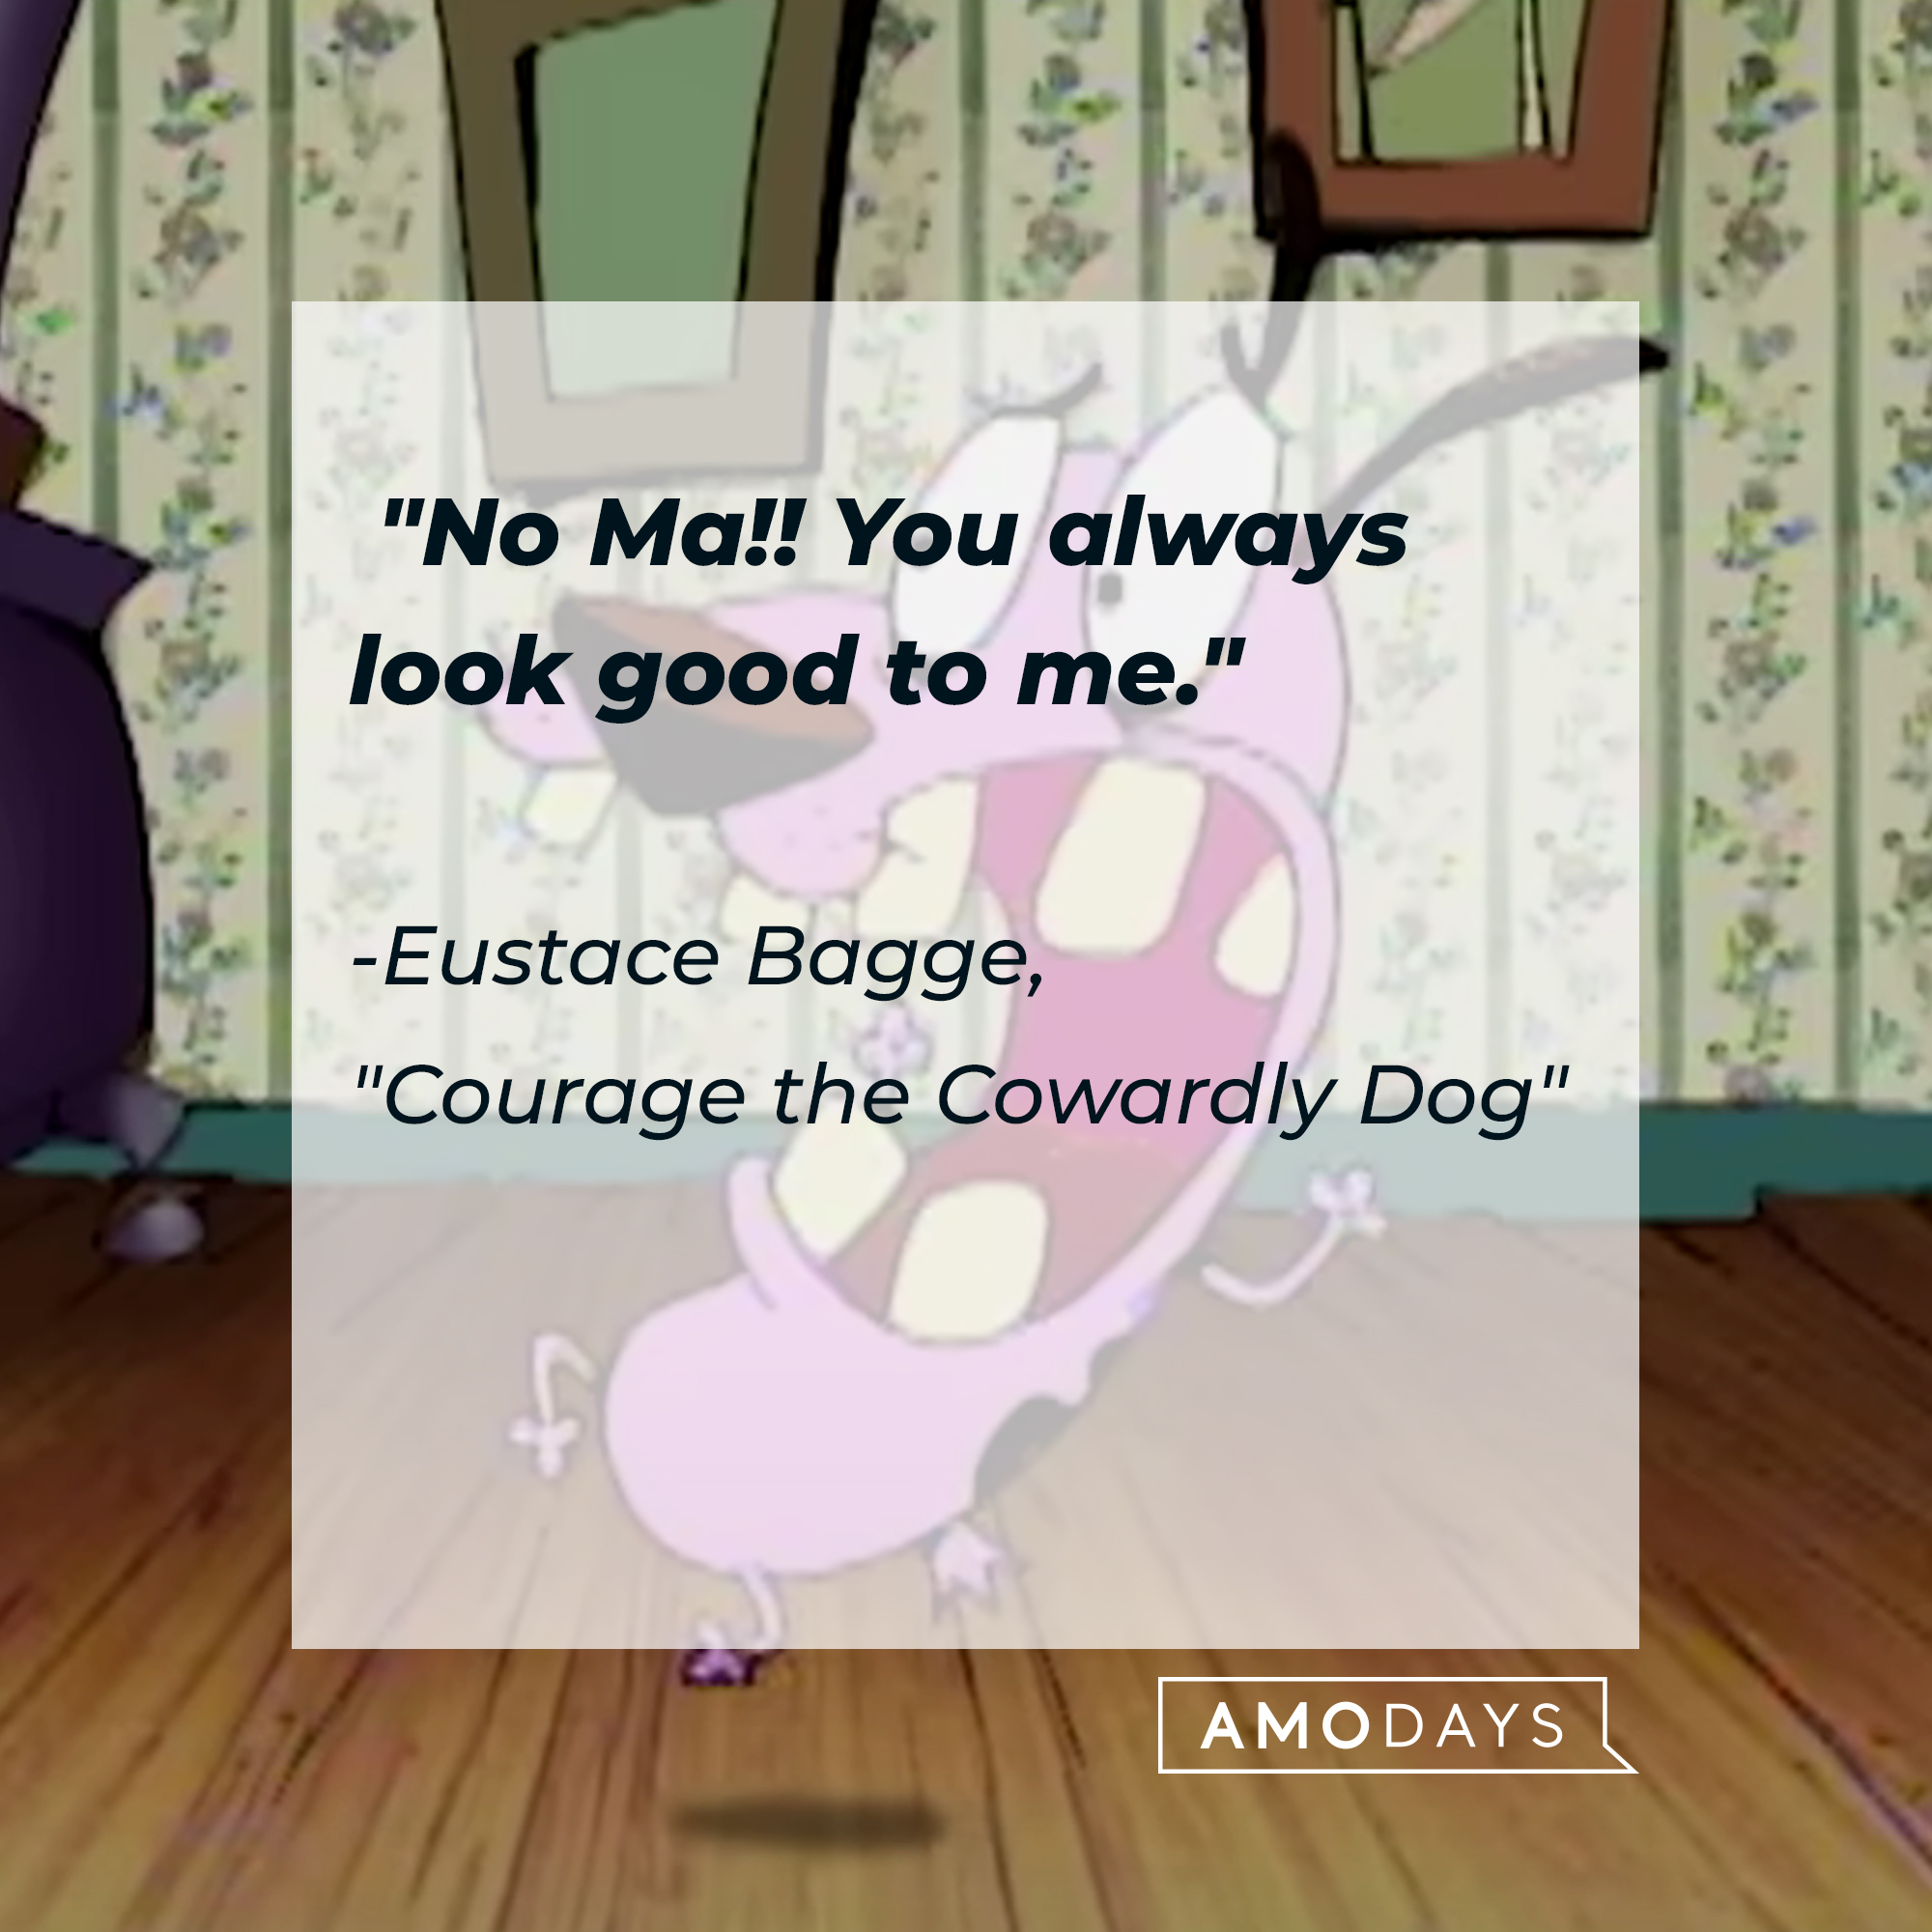 Eustace's quote: "No Ma!! You always look good to me." | Source: Facebook.com/CartoonNetwork